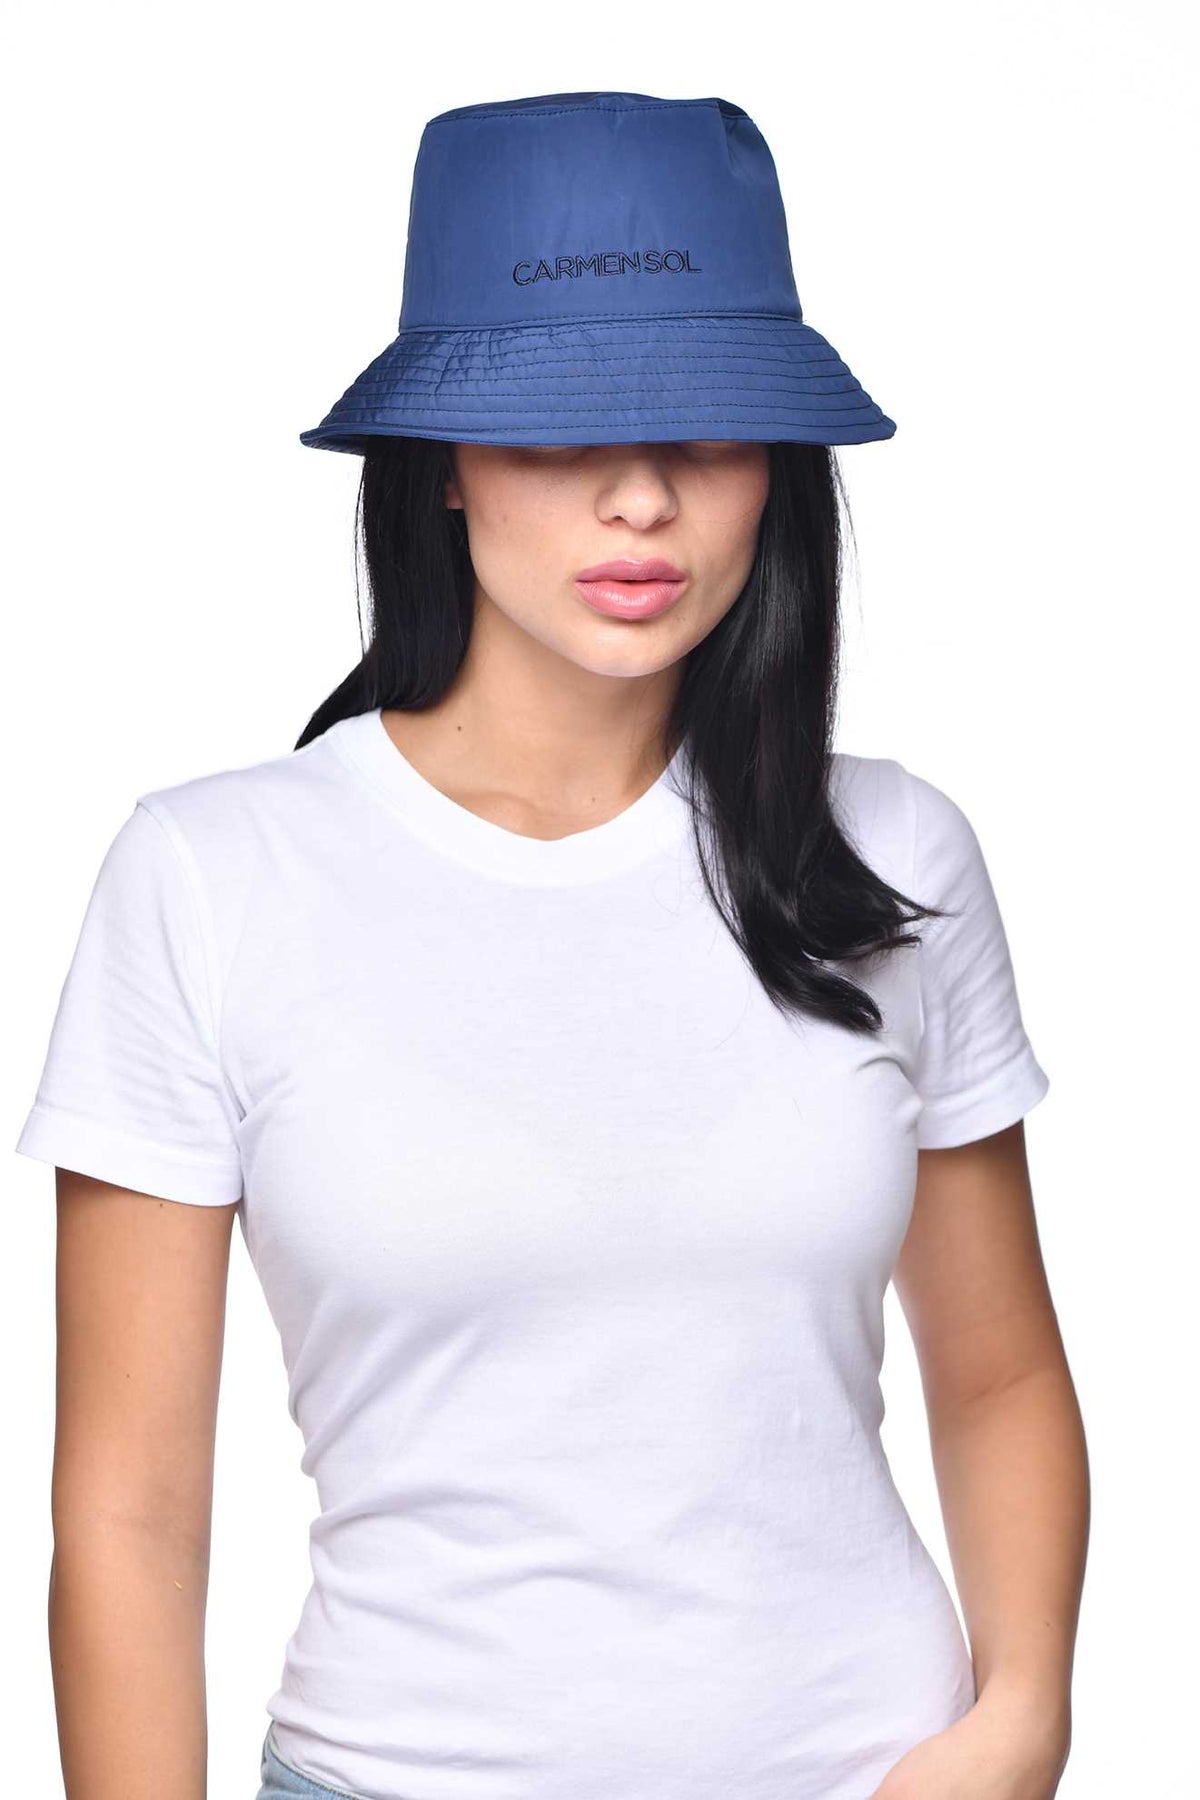 Women wearing made in Italy Raquel nylon womens bucket hat in color navy blue